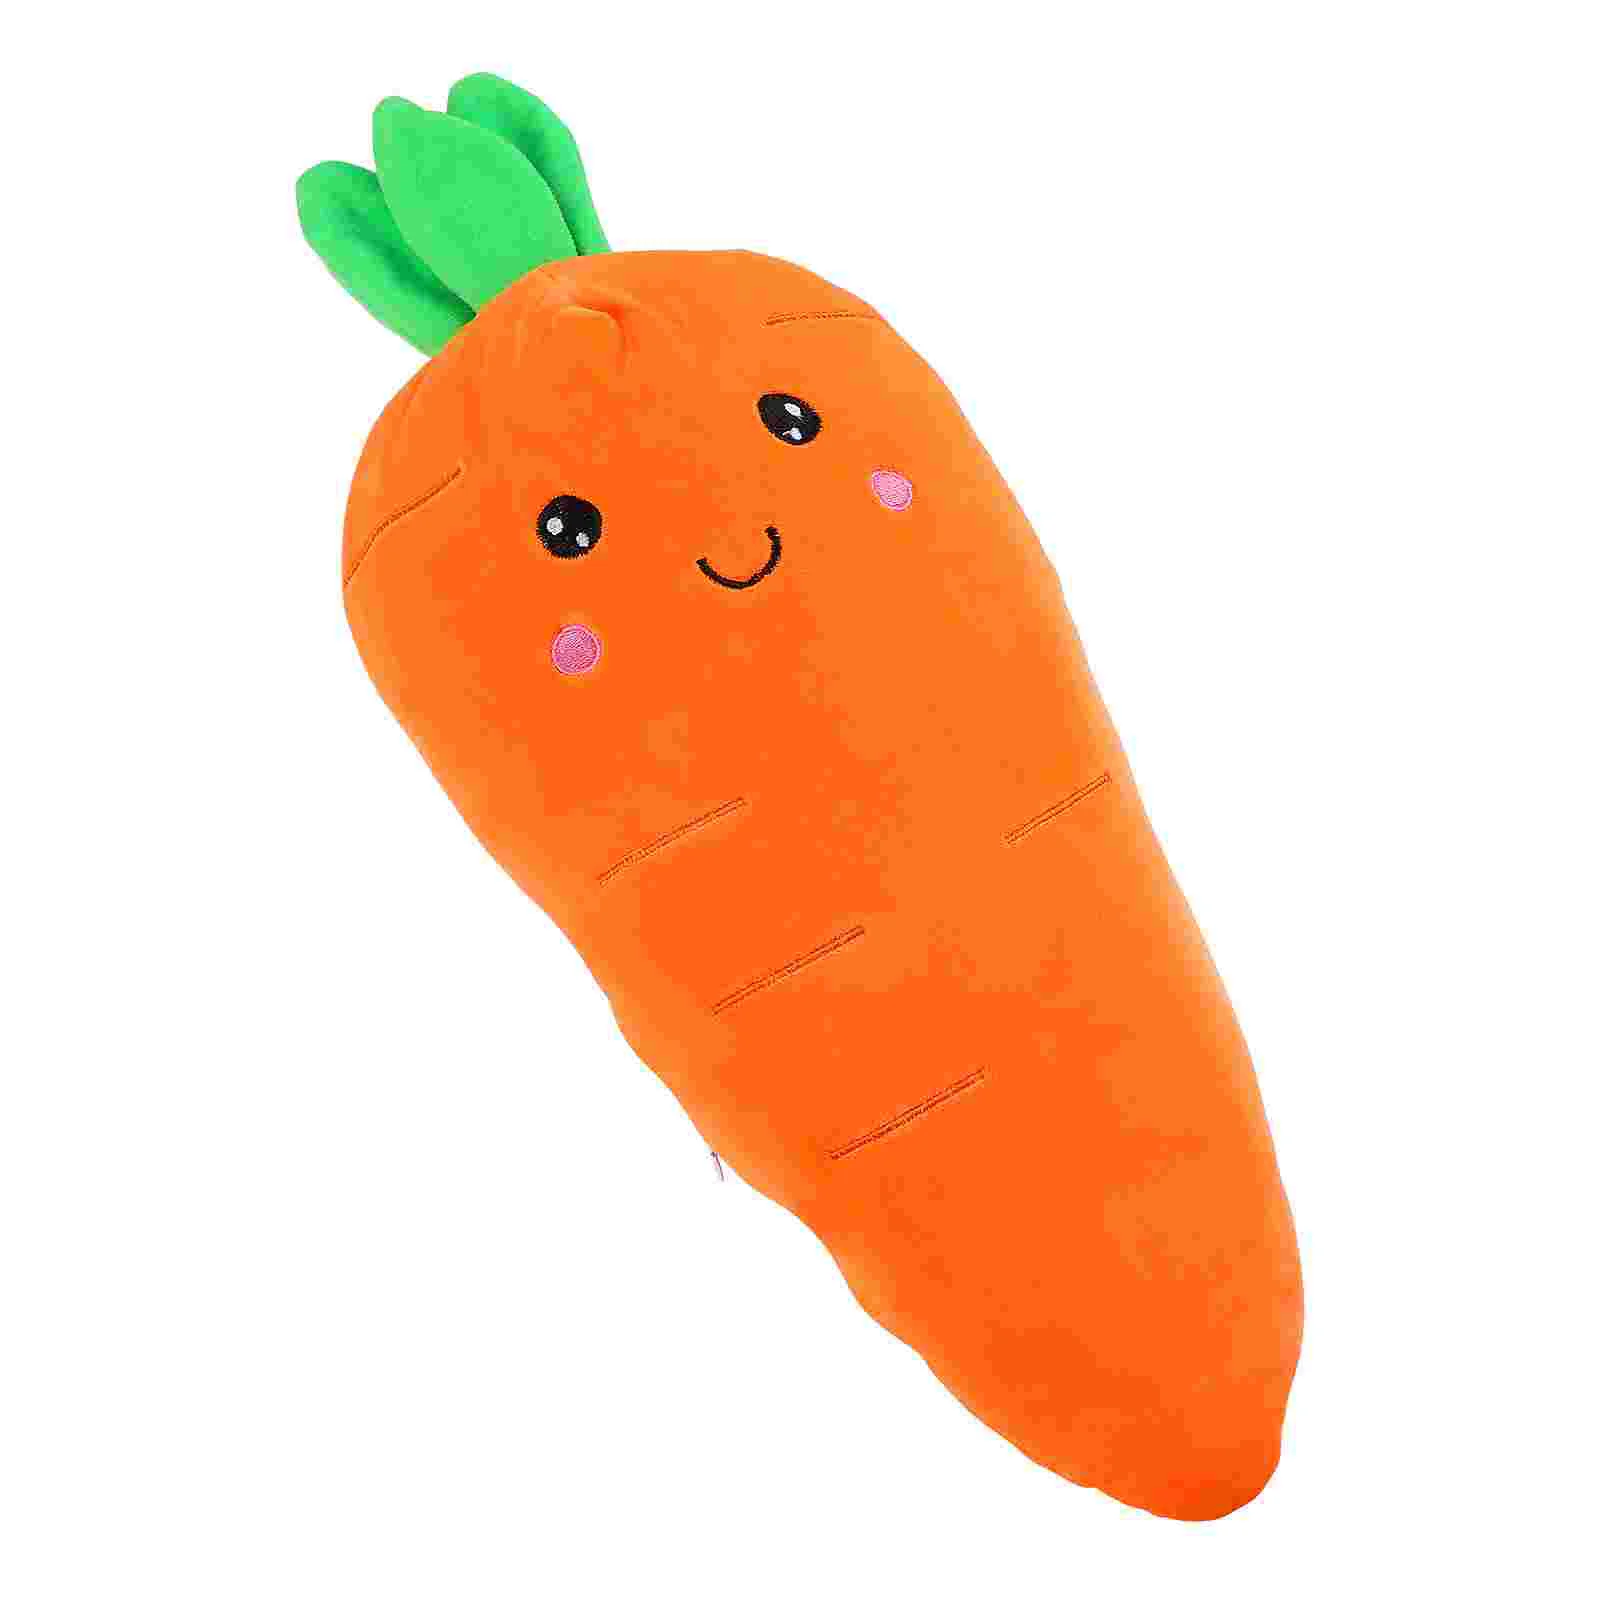 

Carrot Shaped Cushion Bedroom Pillow Pillows for Couch Carrot-shape Stuffed Plush Toy Throw Sofa Sleeping